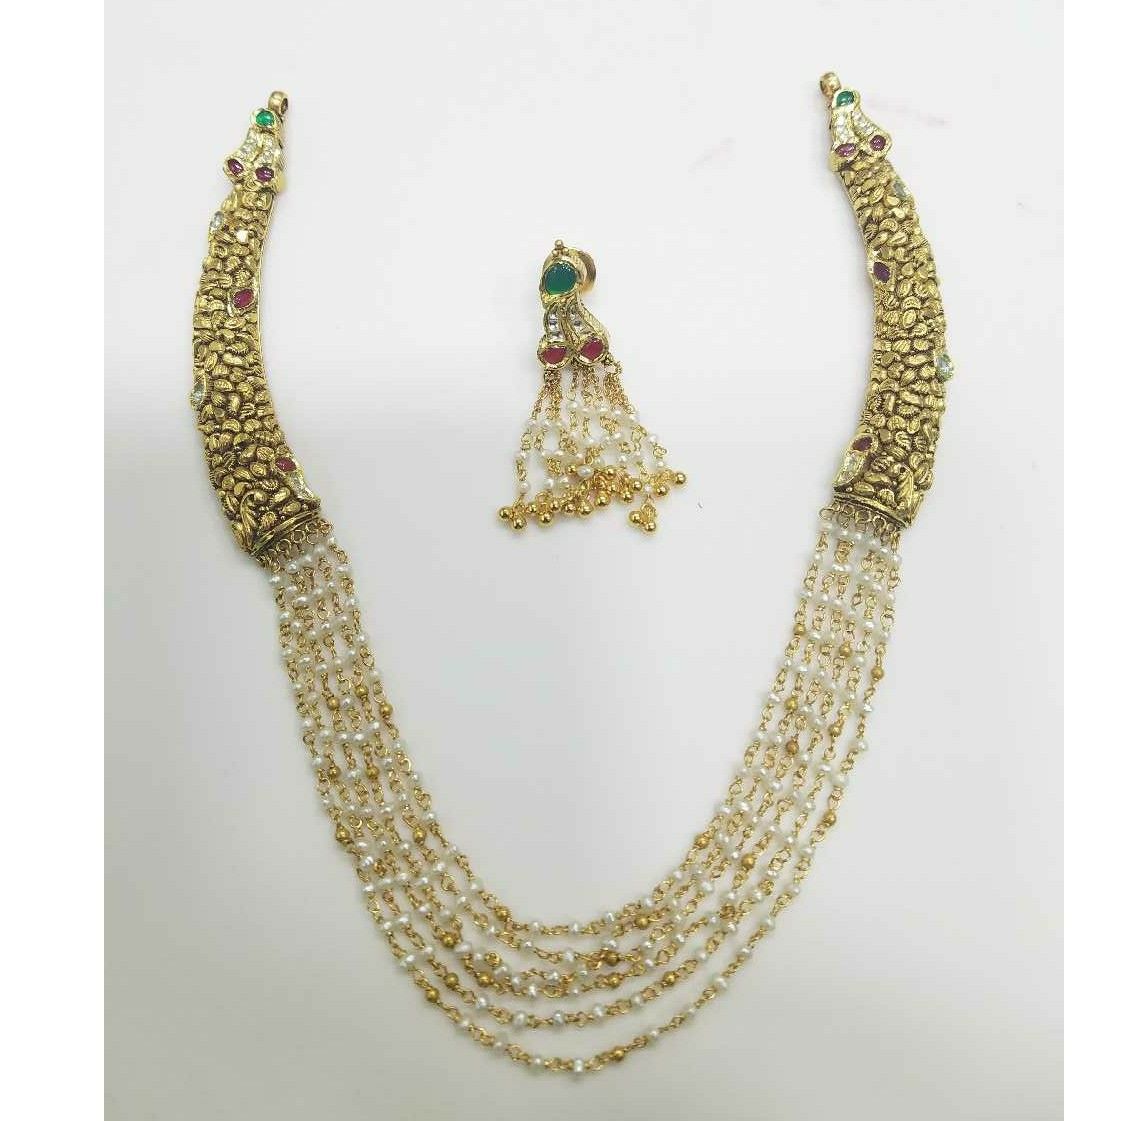 Slider Necklace Set 916 Gold With Beads